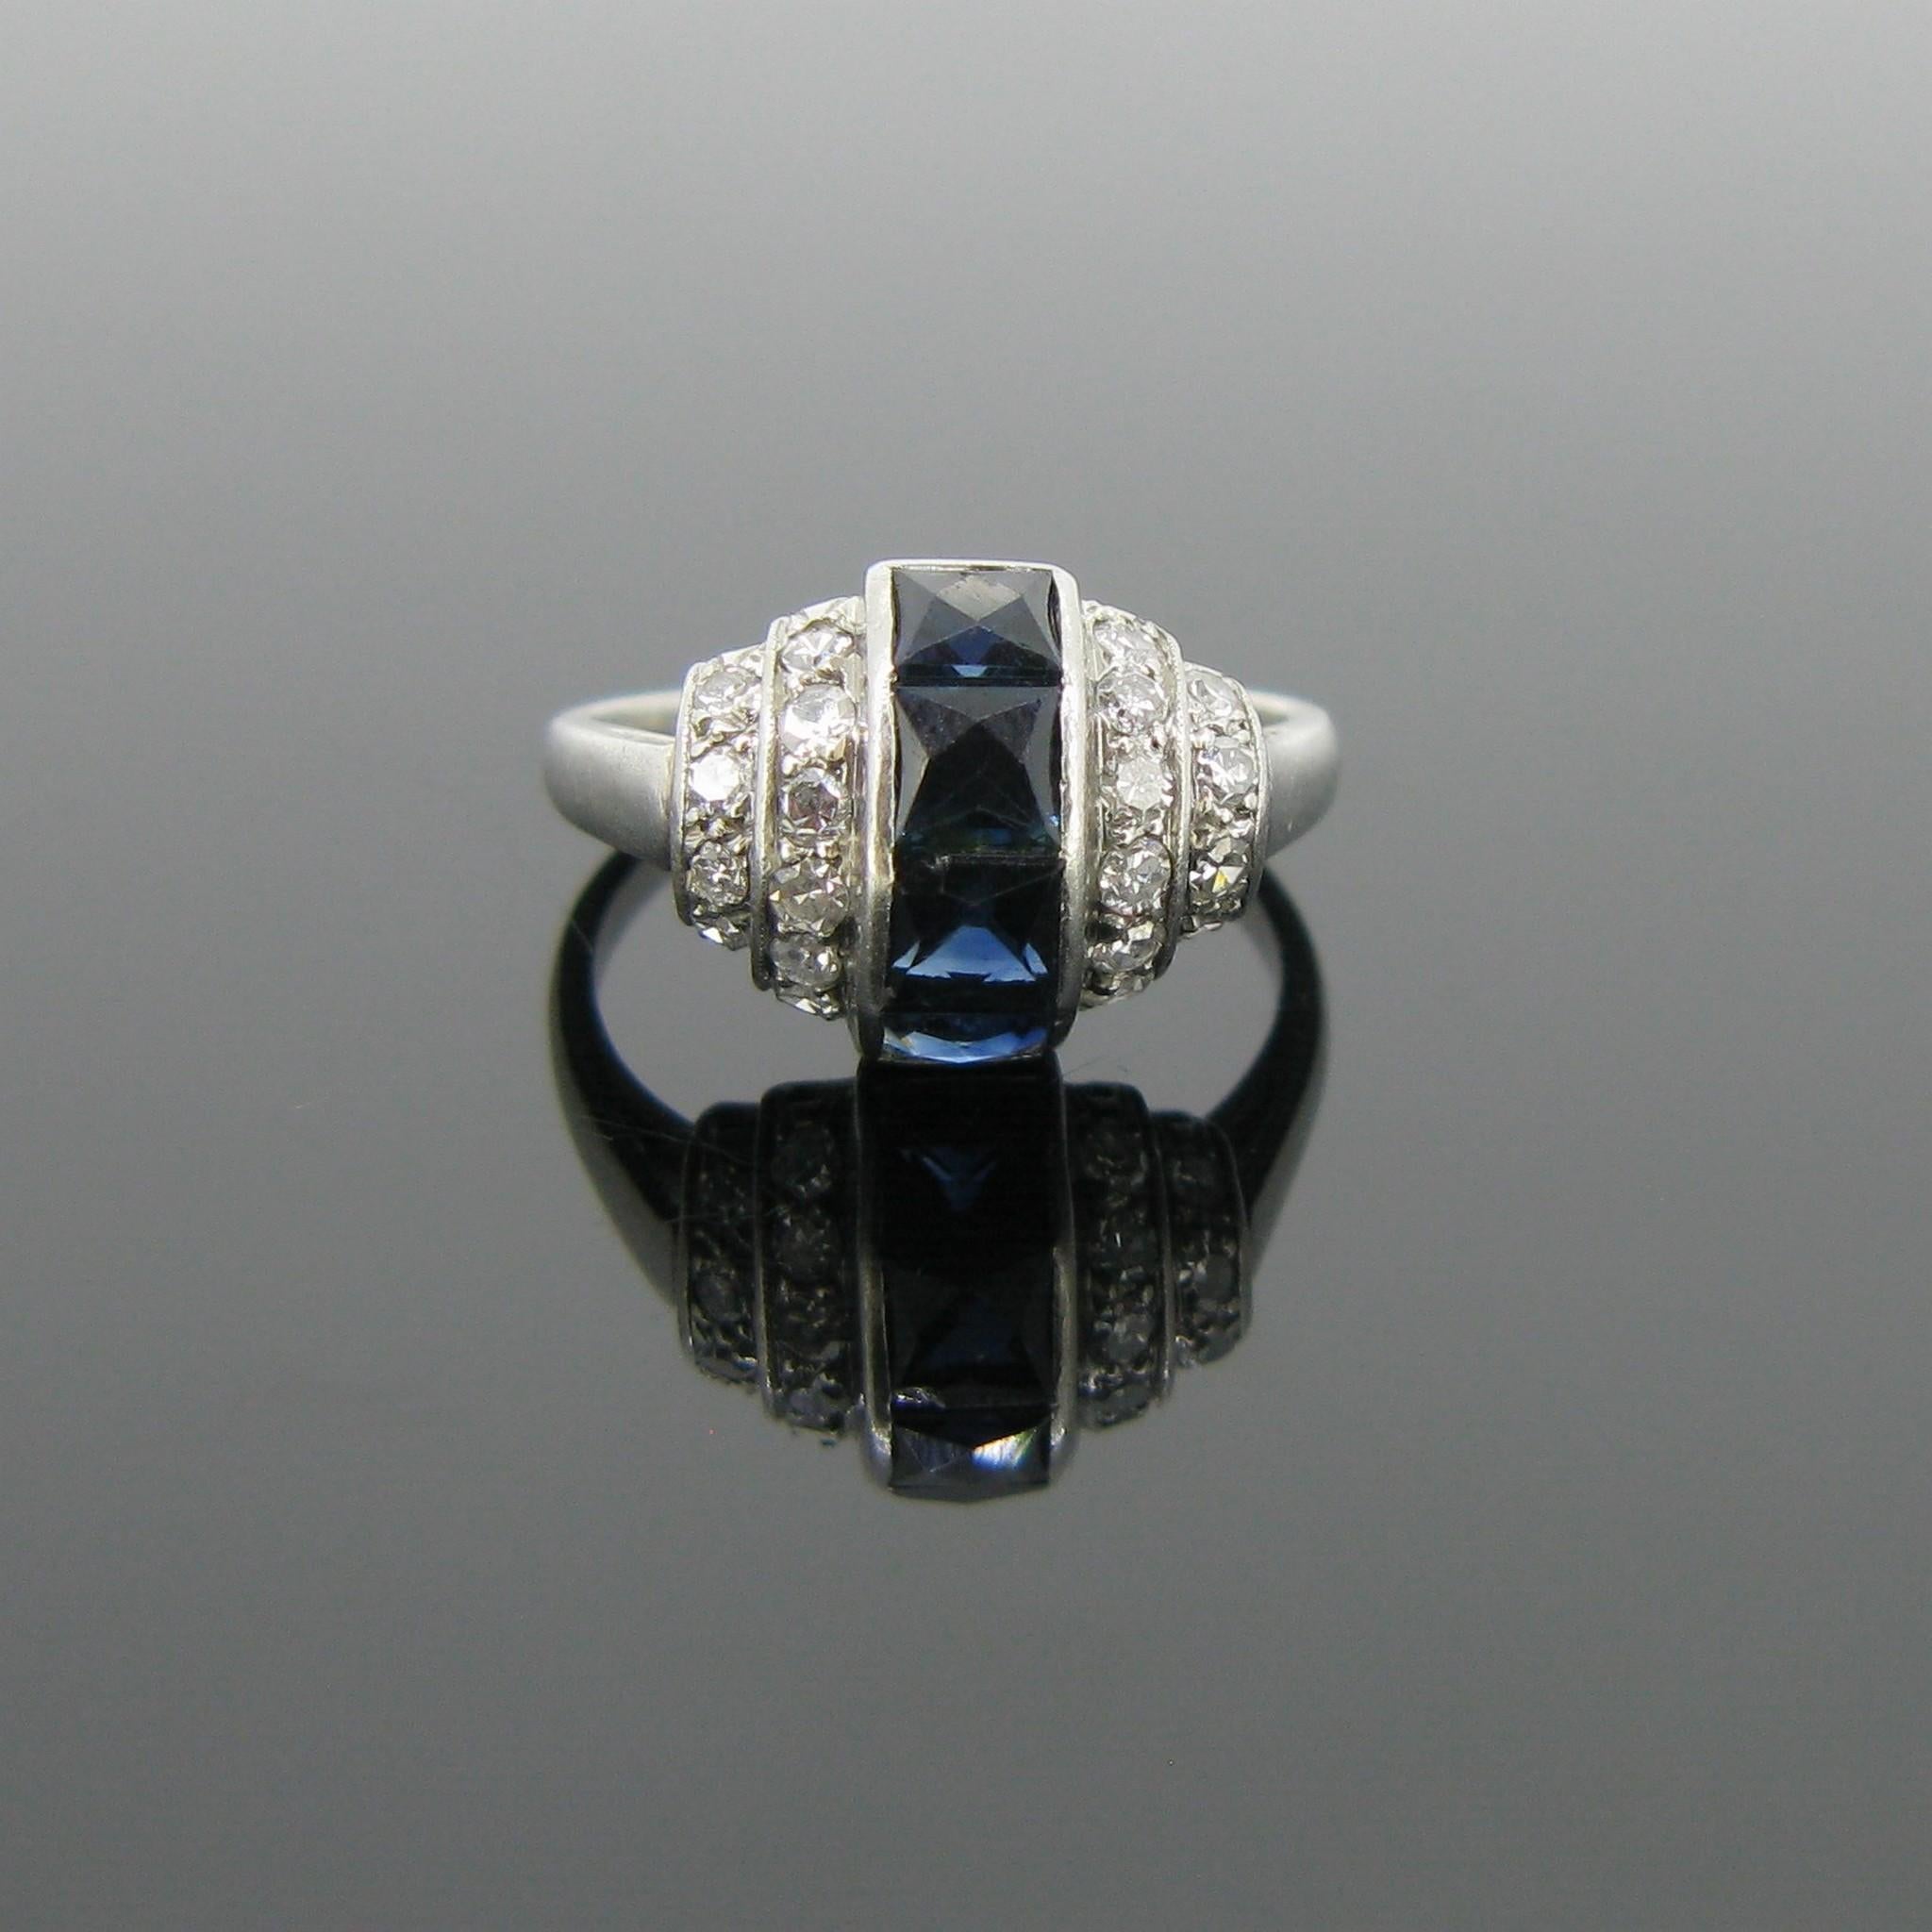 This ring is directly from the Art Deco era. It features 4 French Ct sapphires in the middle row with a total carat weight of at least 1.6ct and is adorned with two rows of single cut diamonds on each side for a total carat weight of 0.60ct. It is